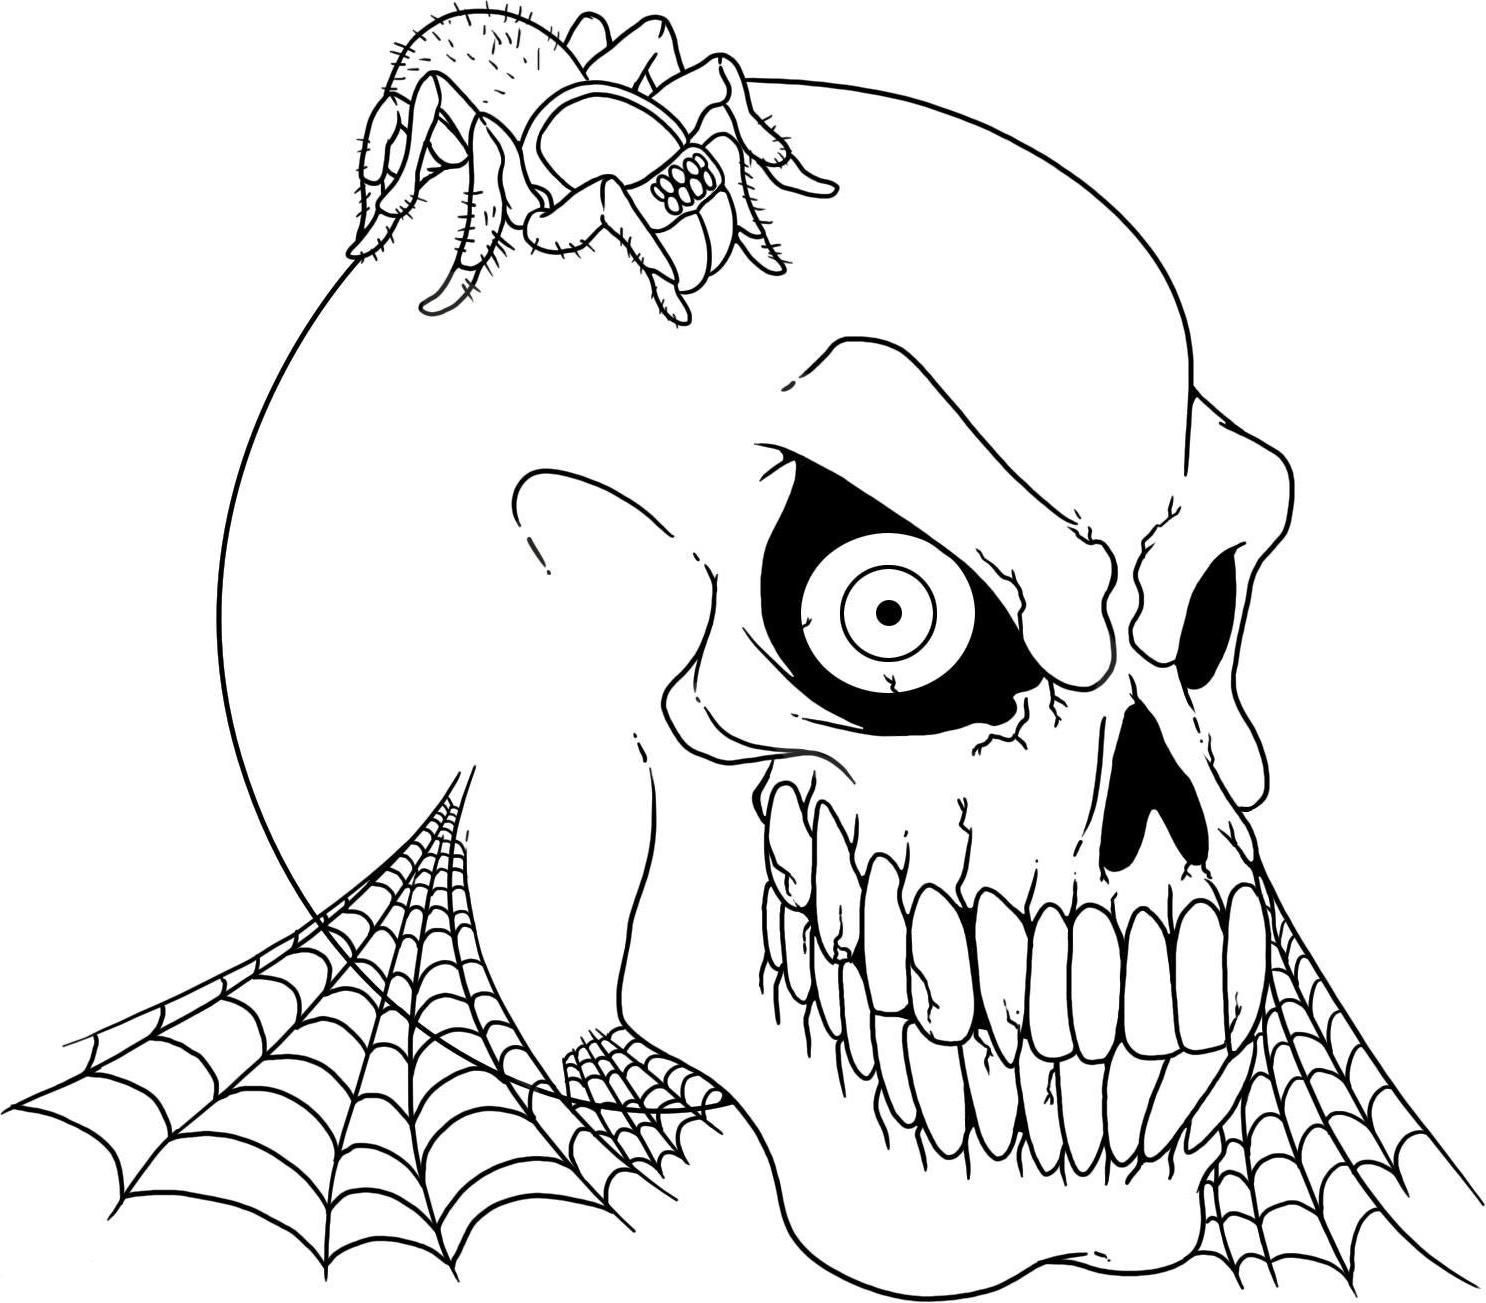 free-halloween-coloring-pages-free-printable-download-free-halloween